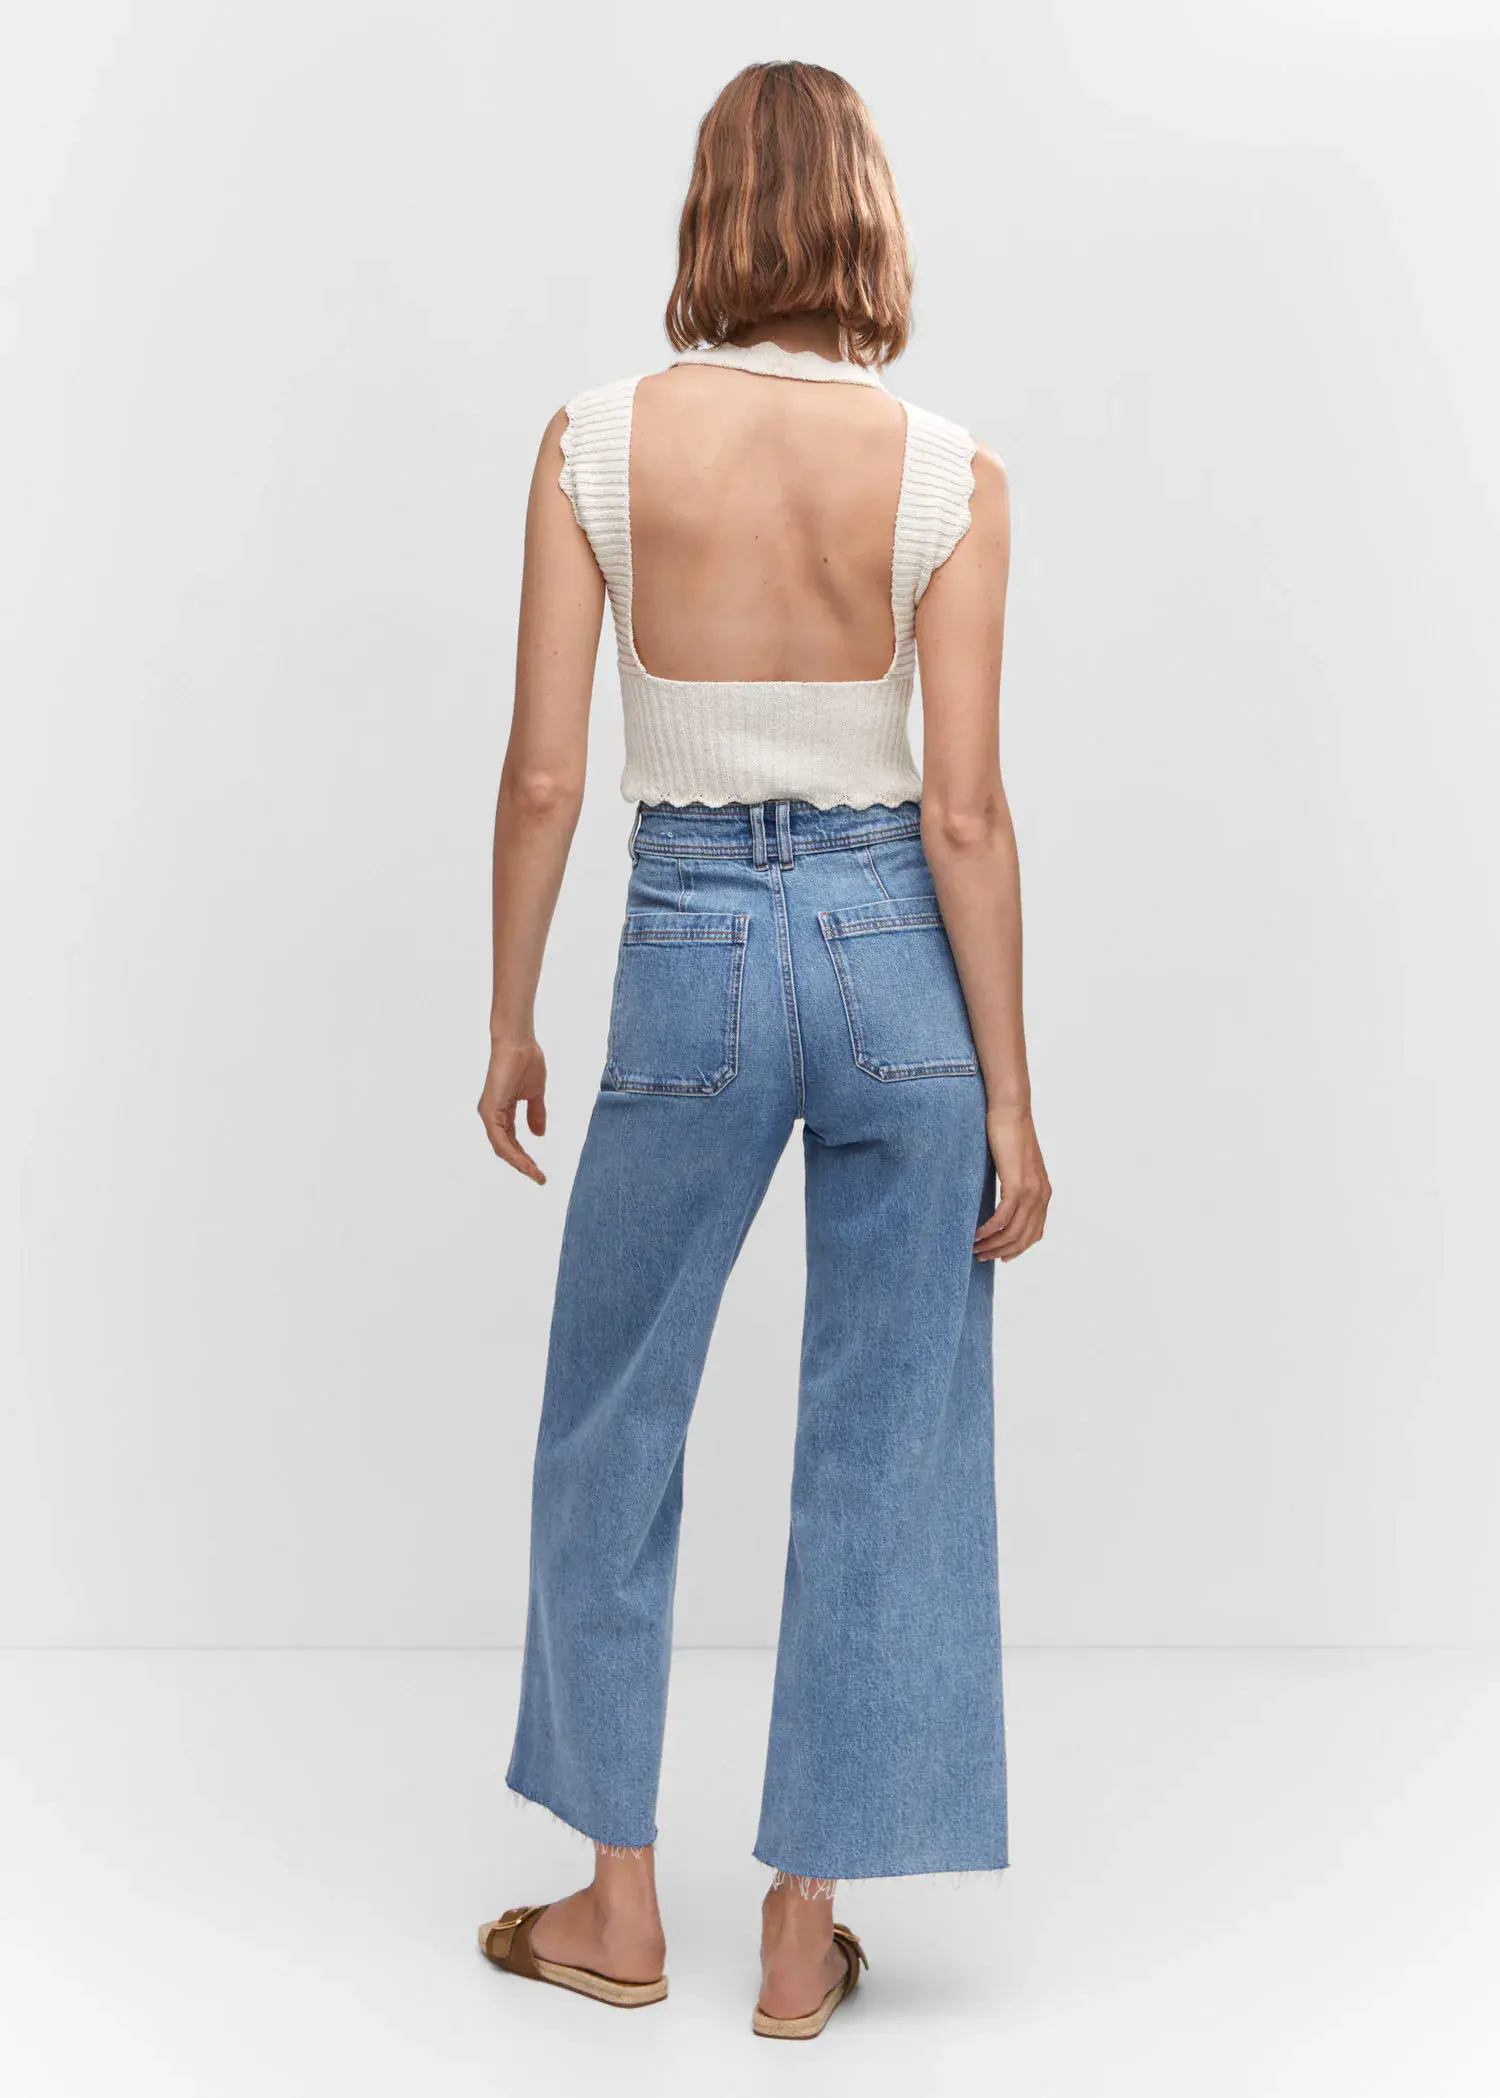 Mango Jeans culotte high waist. a woman wearing a white top and blue jeans. 